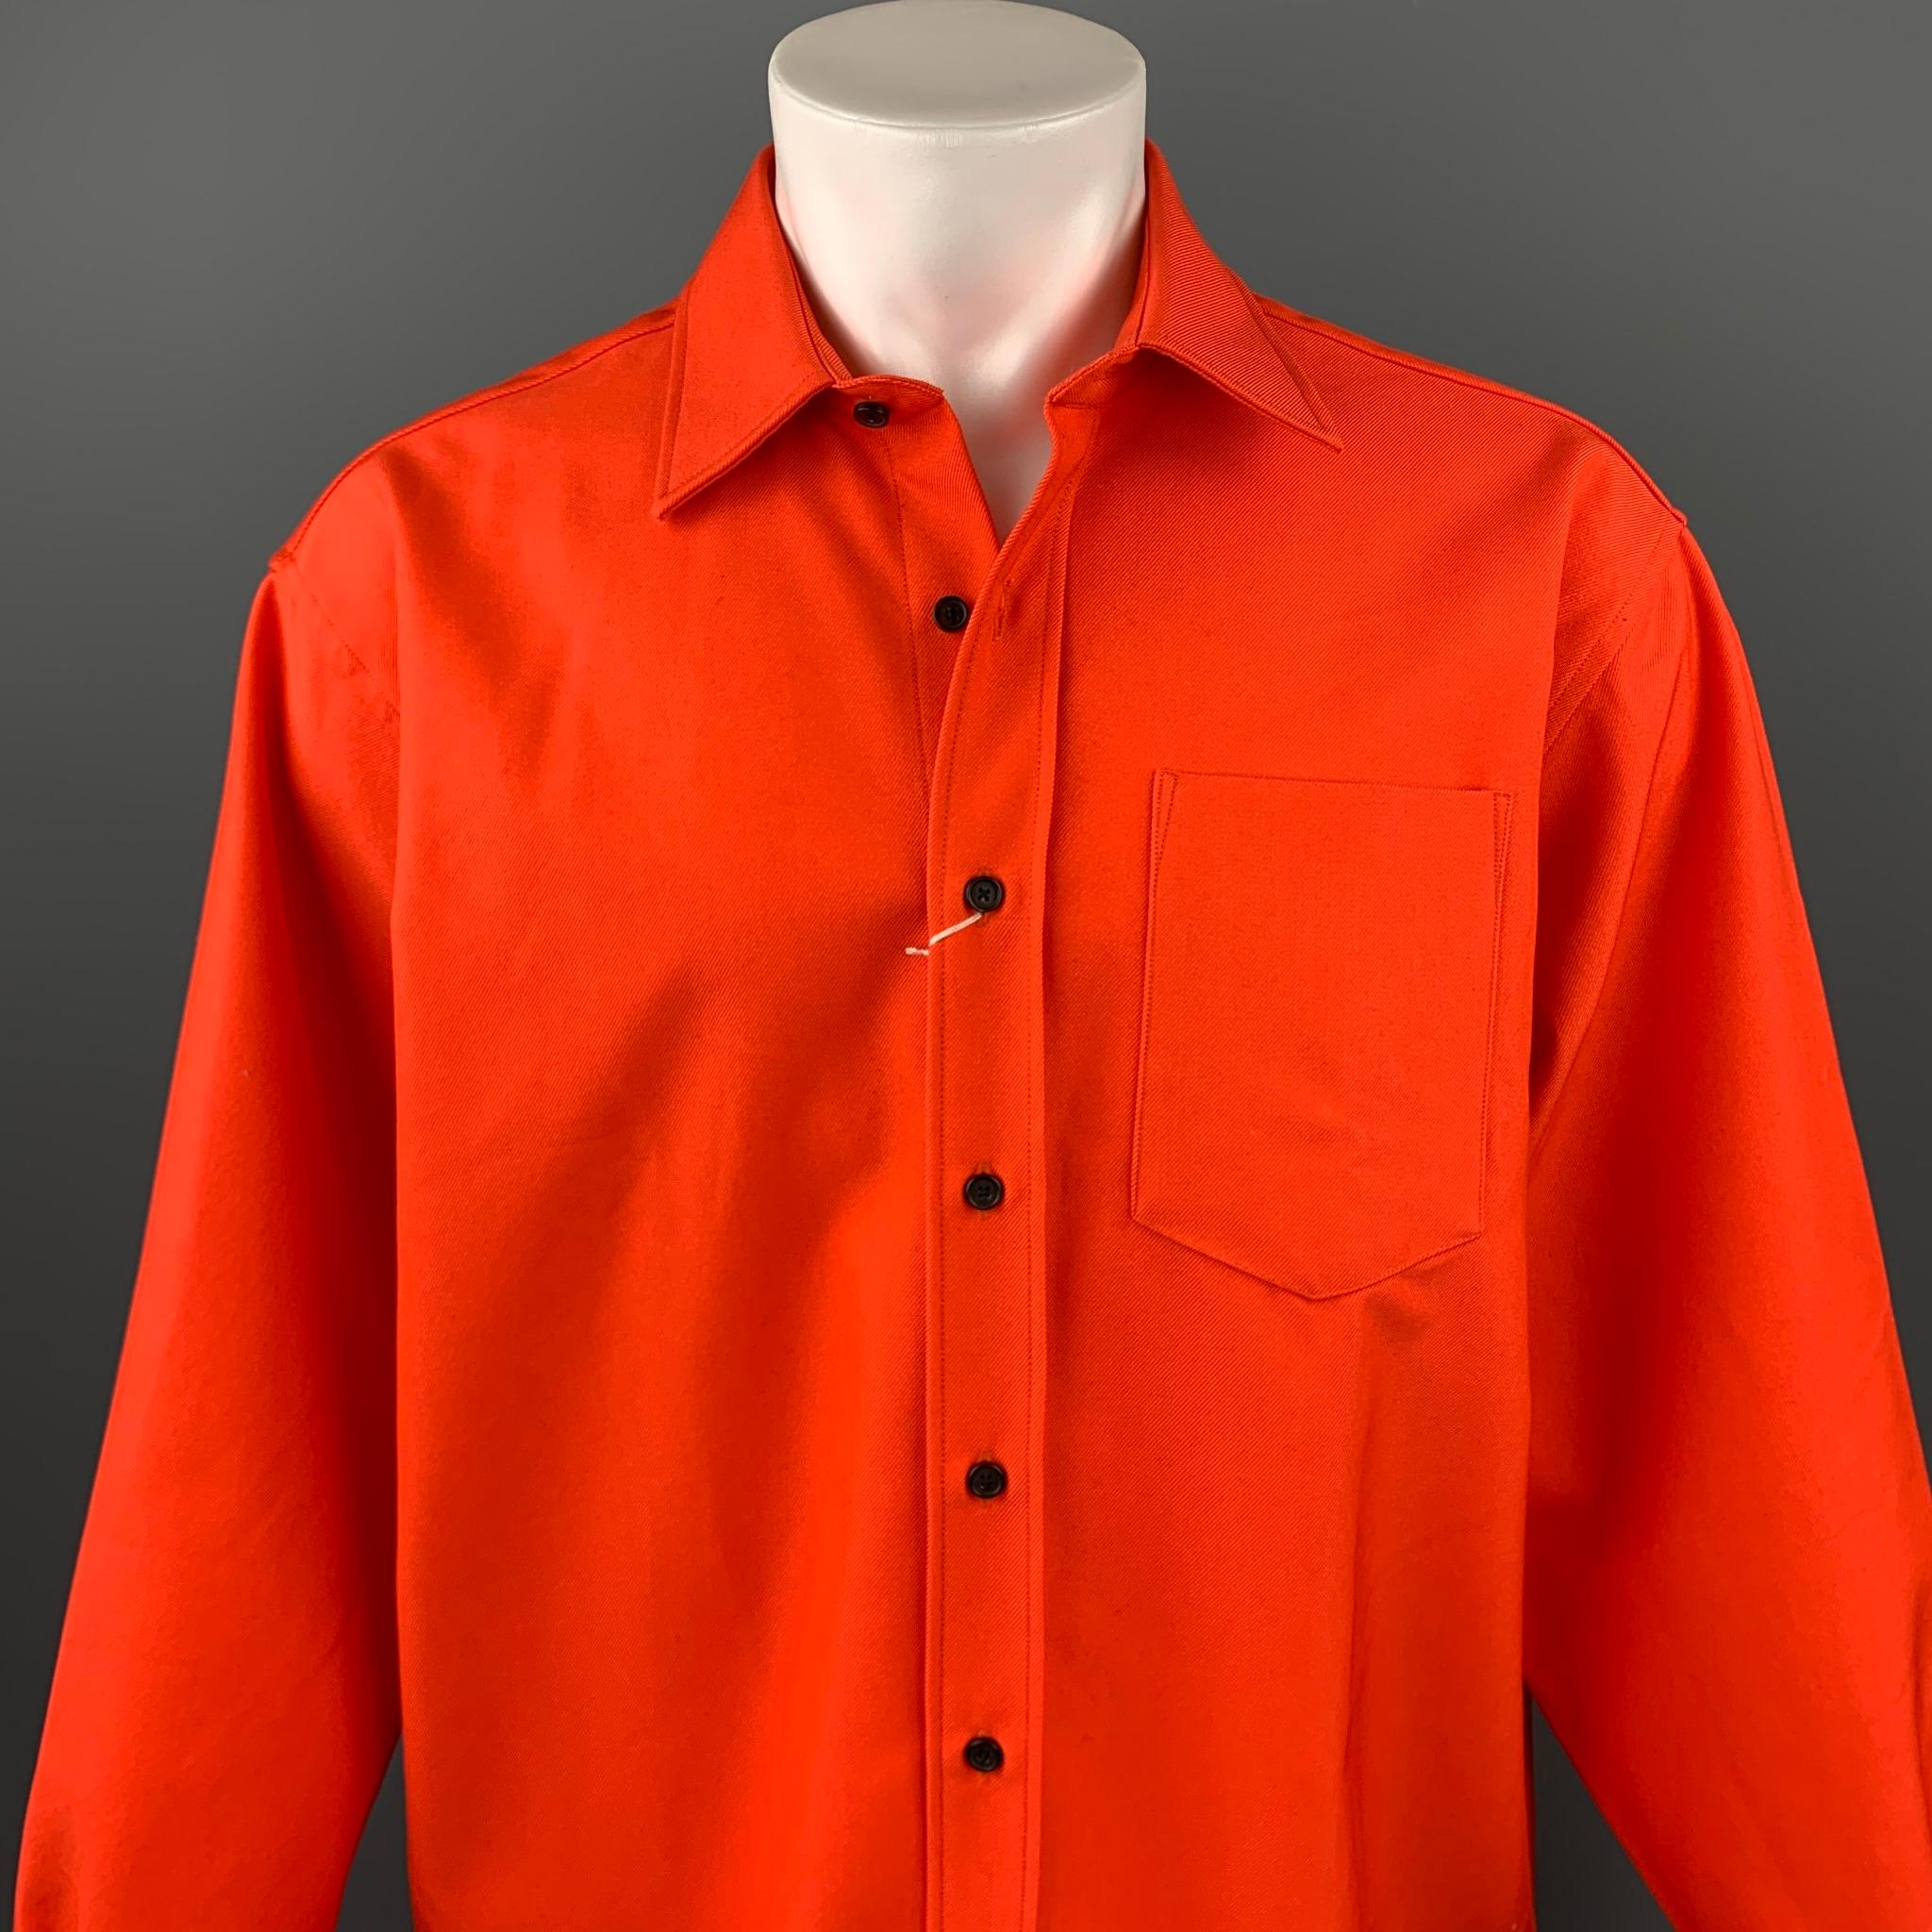 ACNE STUDIOS long sleeve shirt comes in a orange cotton / polyester featuring a oversized style, front patch pocket, spread collar, and a button up closure. 

New With Tags.
Marked: 48

Measurements:

Shoulder: 21 in. 
Chest: 52 in. 
Sleeve: 25.5